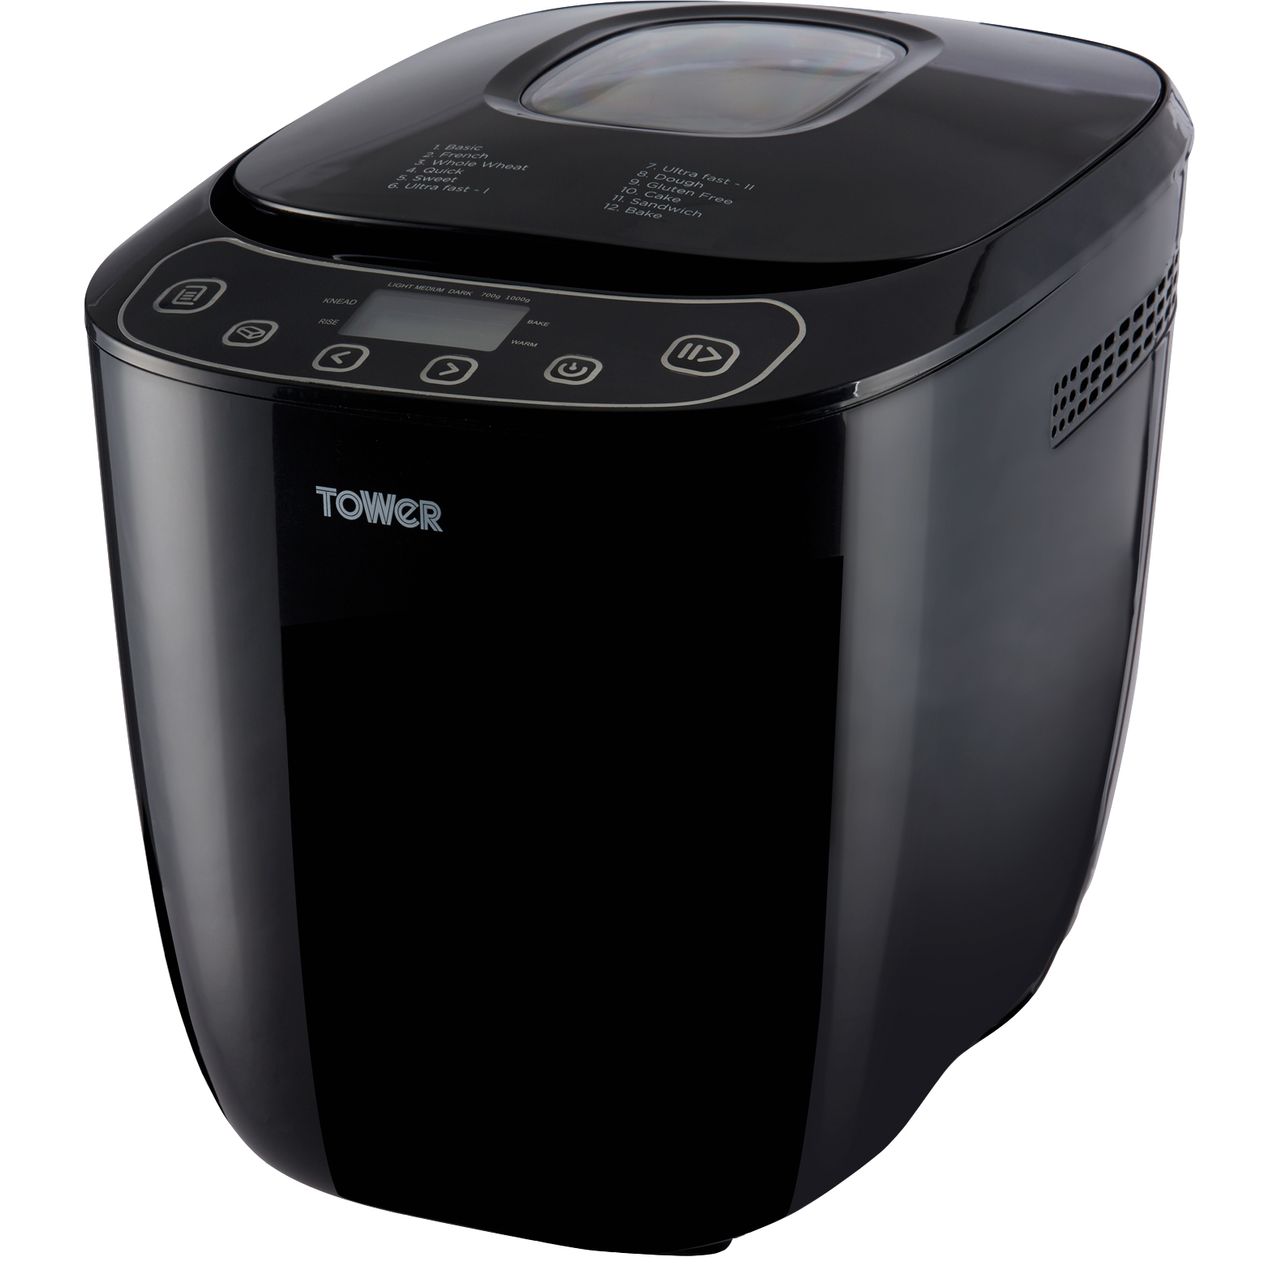 Tower T11003 Bread Maker with 12 programmes Review